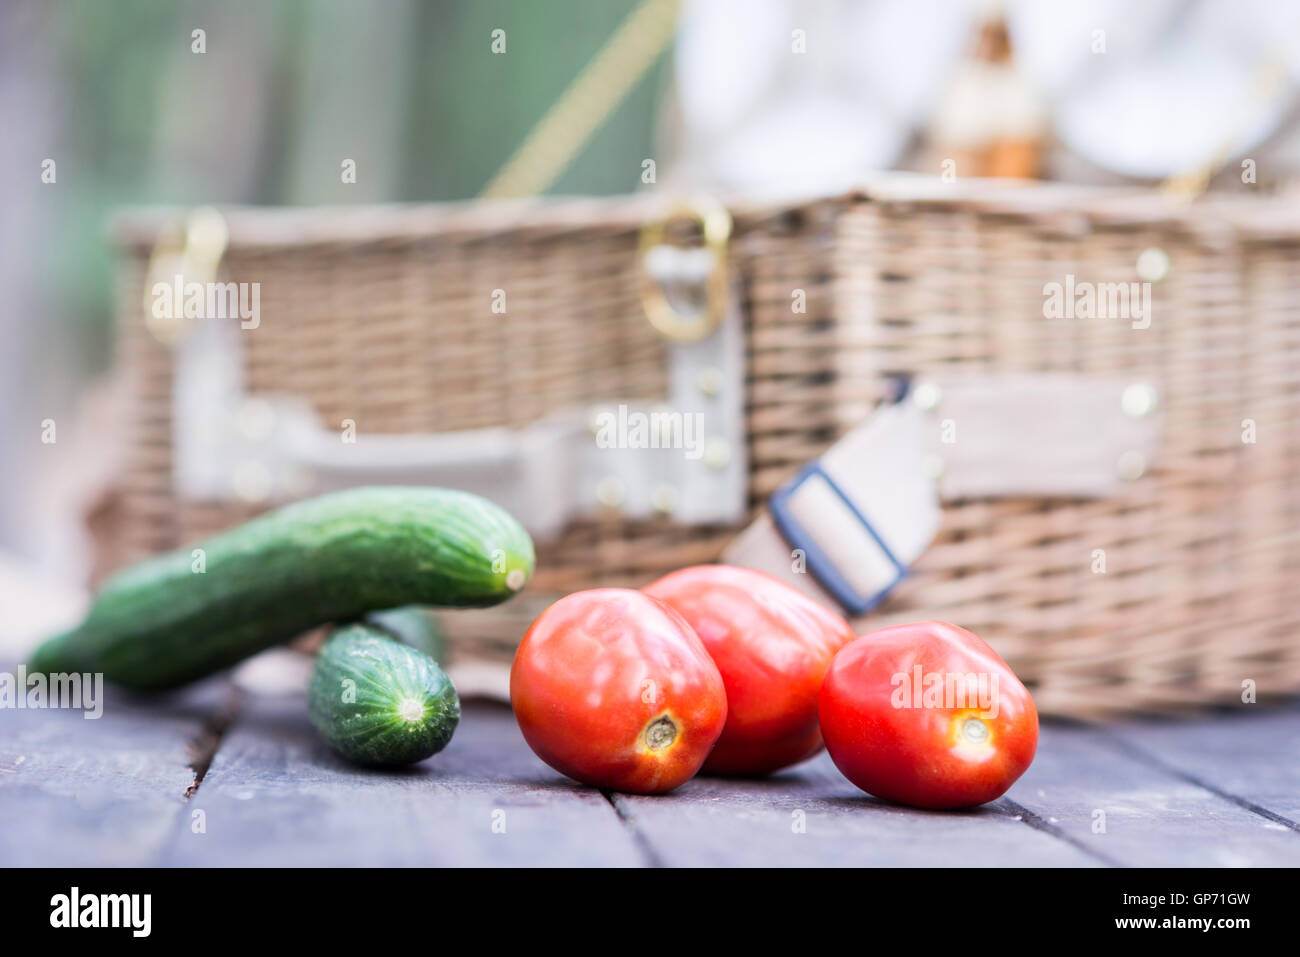 Close up of tomatoes and cucumbers over wooden table in front of an open picnic basket. Stock Photo